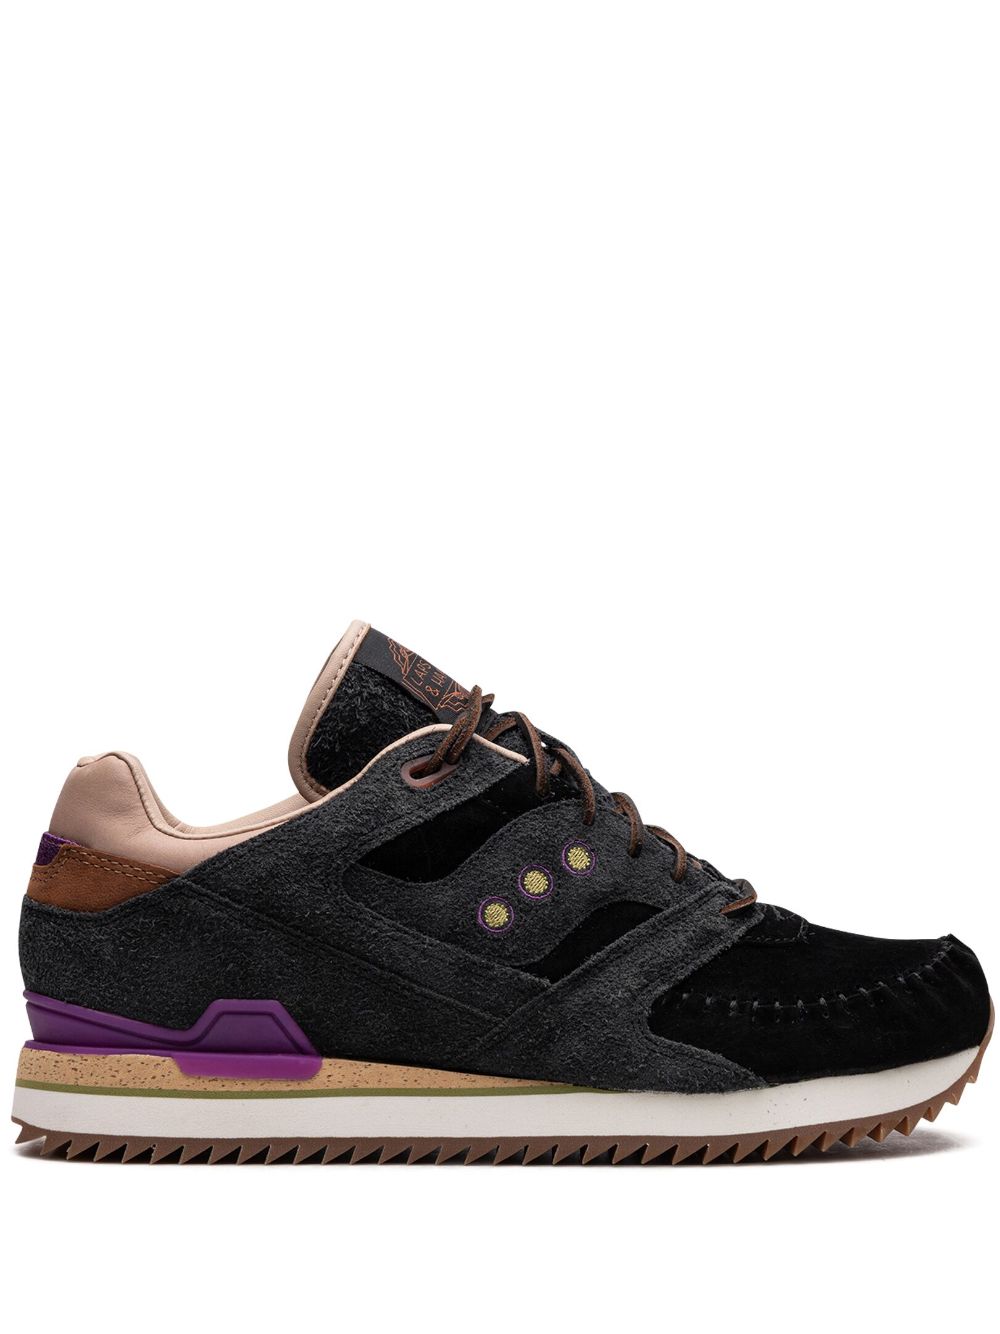 Saucony Courageous Moc "Lapstone and Hammer" sneakers - Black von Saucony